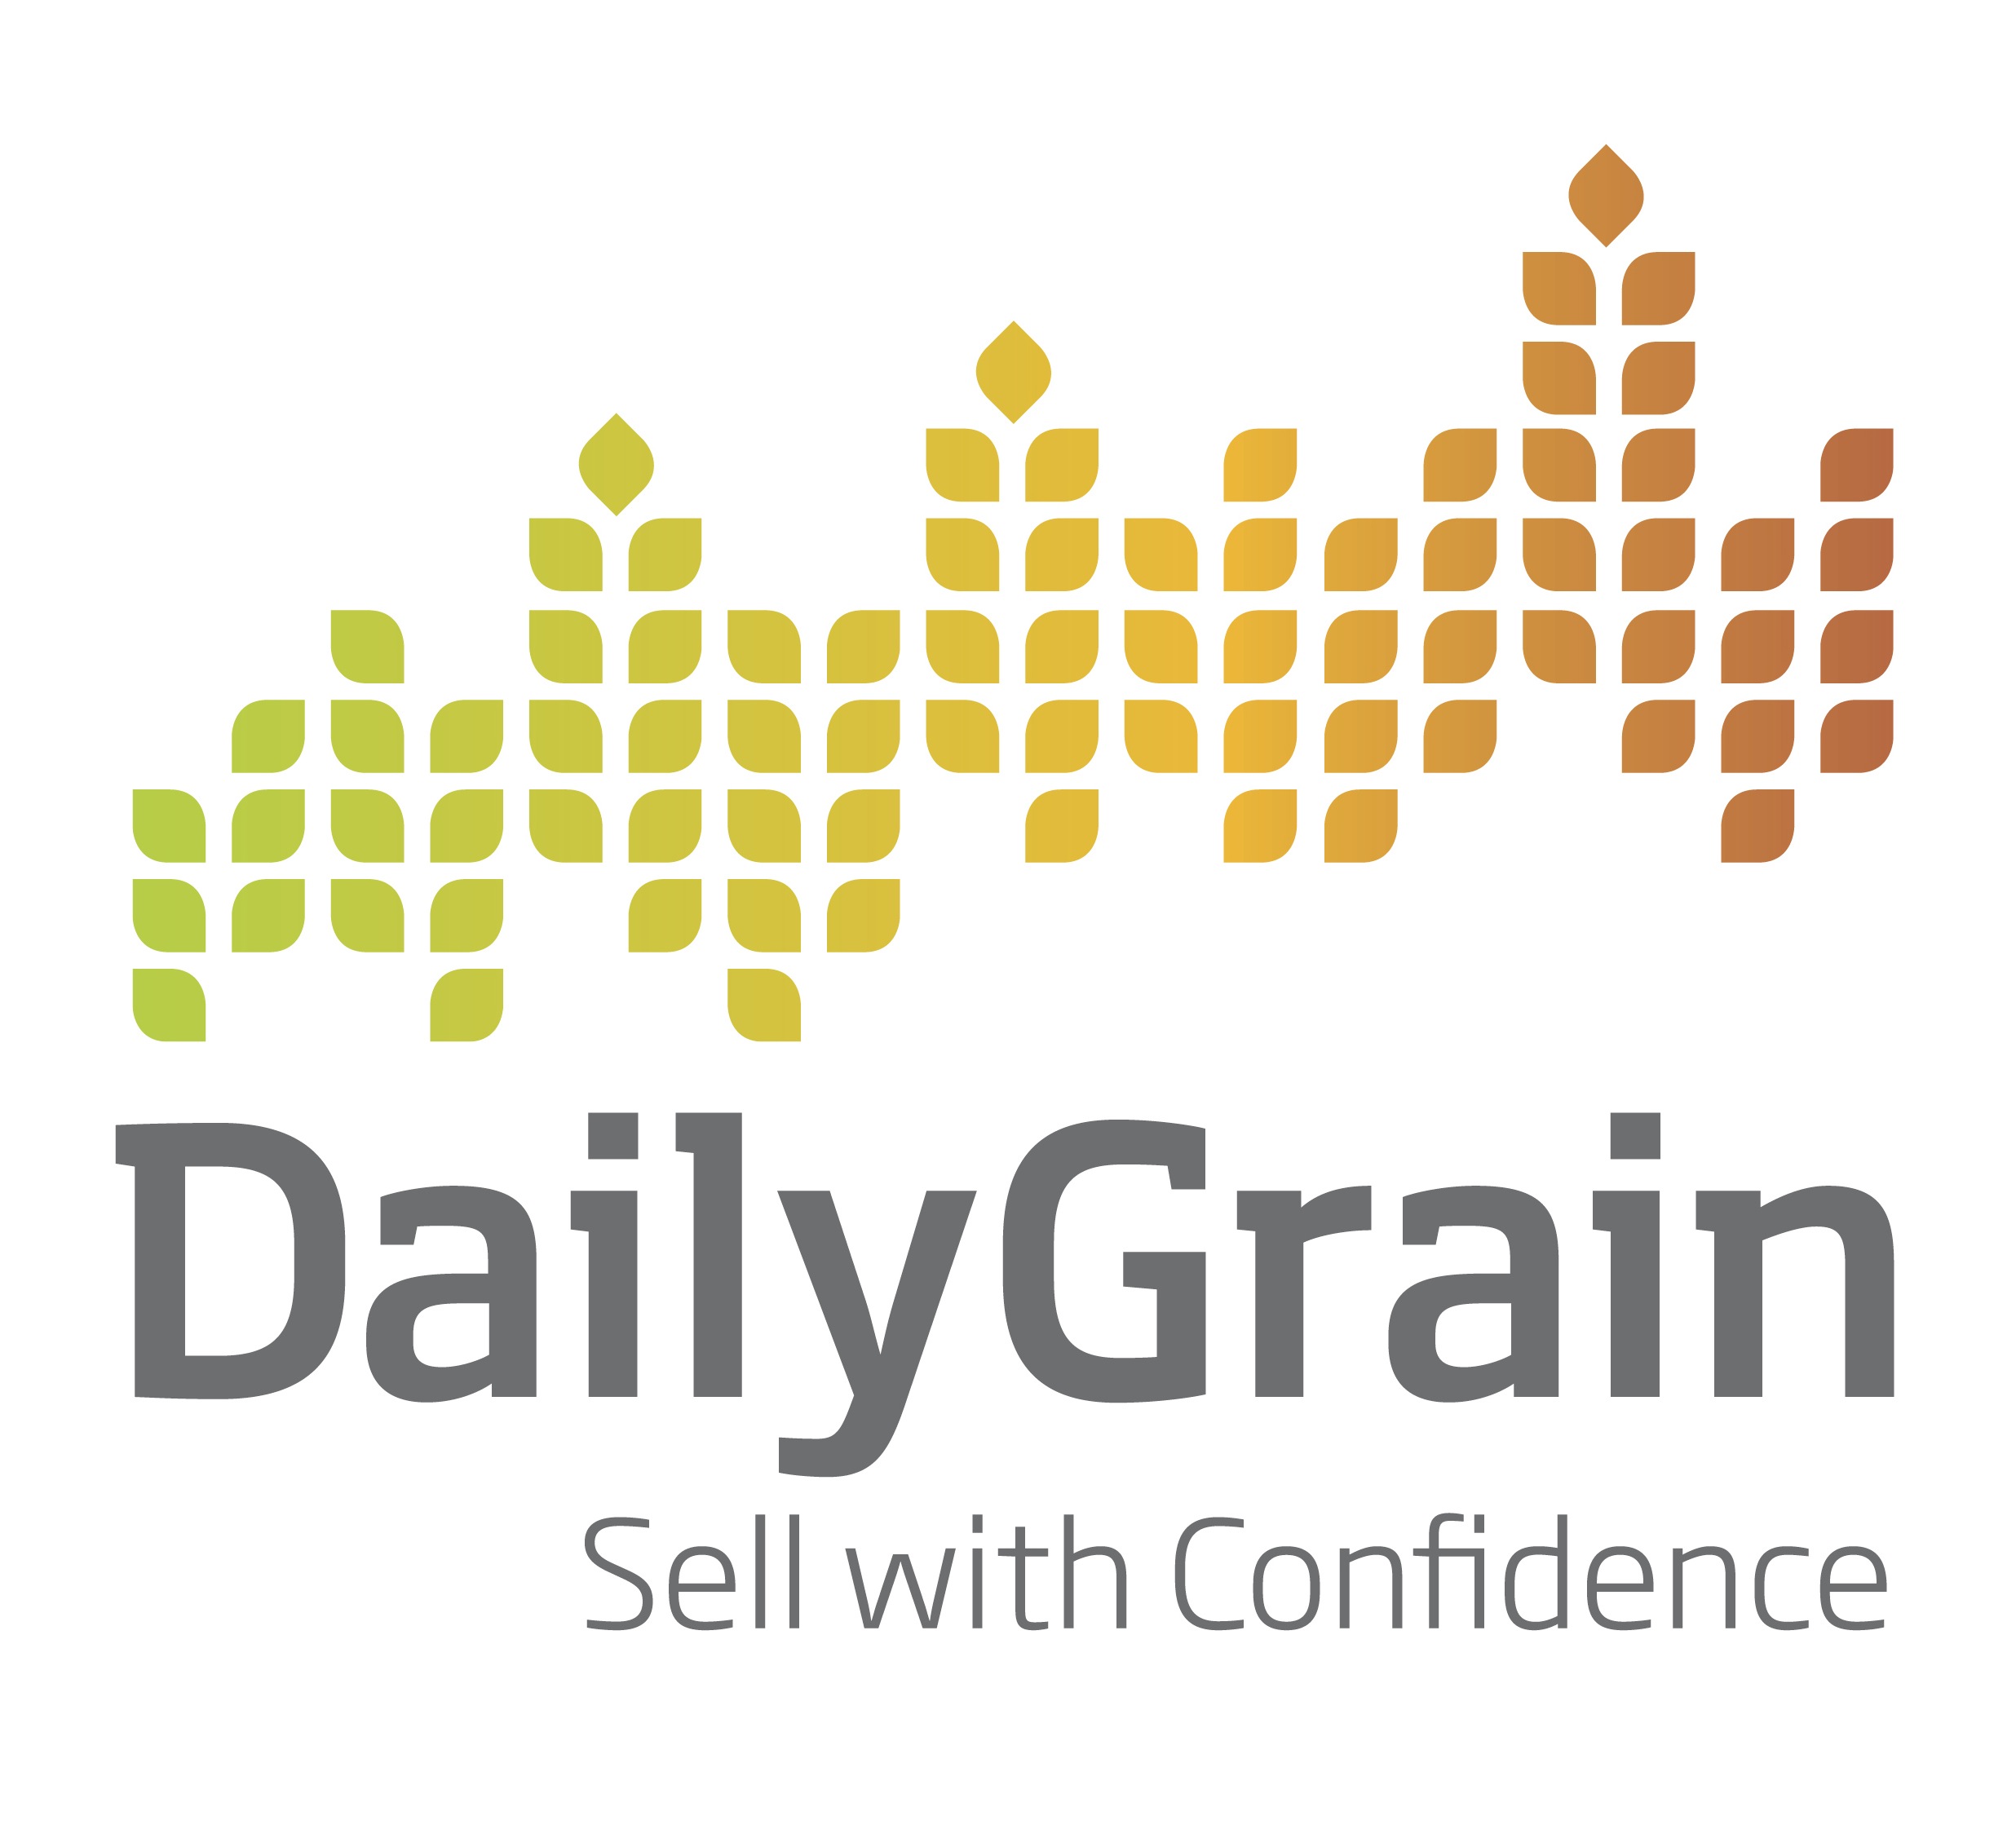 DailyGrain - Sell with Confidence